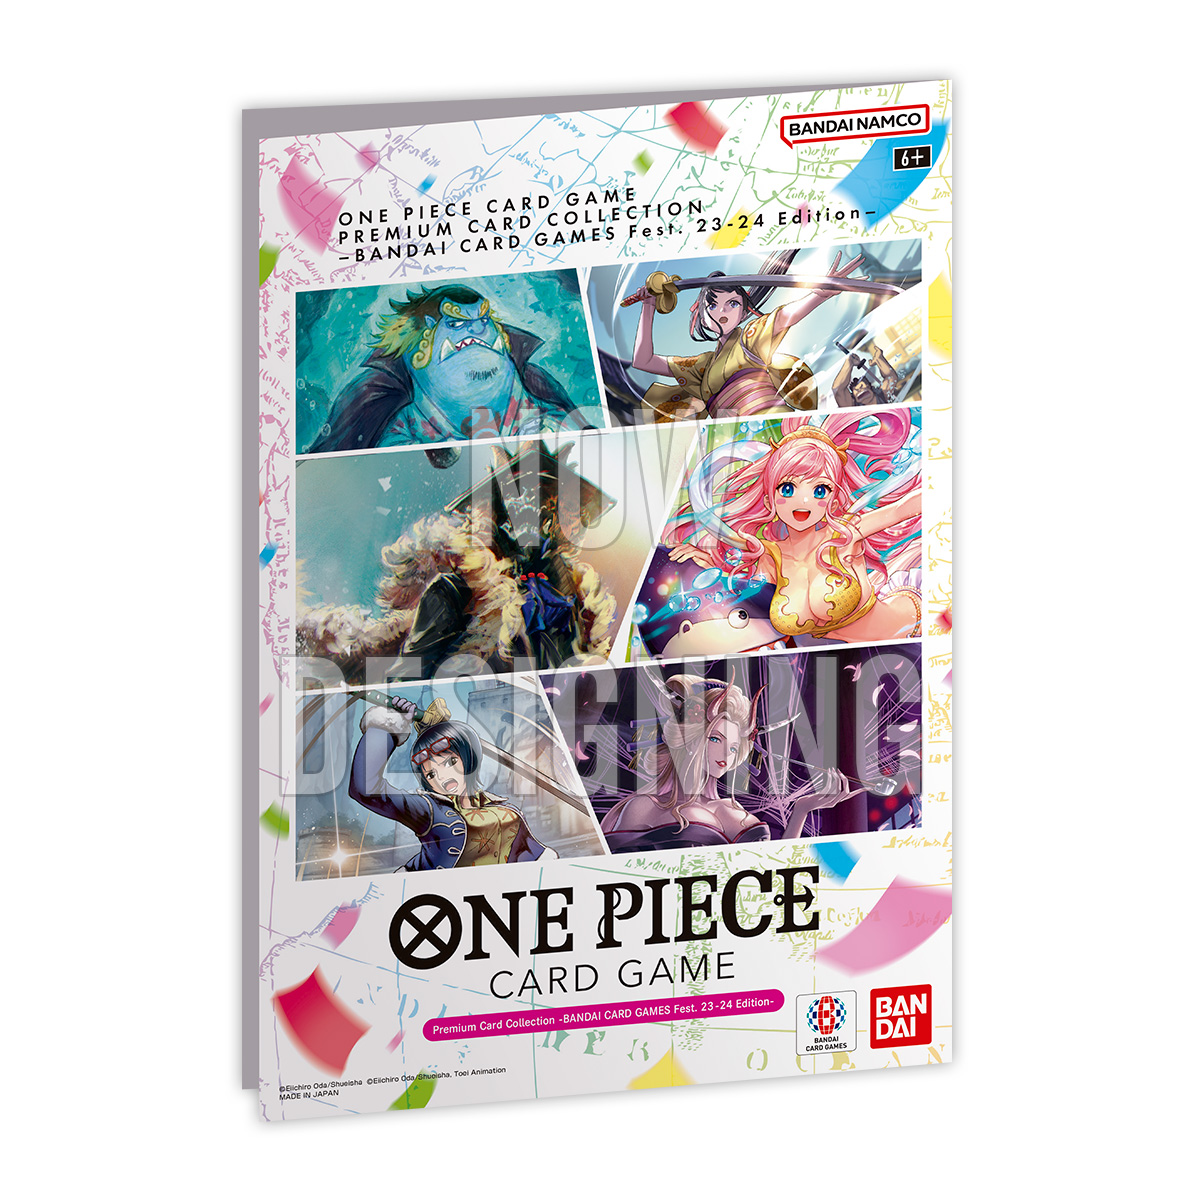 ONE PIECE CARD GAME Premium Card Collection -BANDAI CARD GAMES 